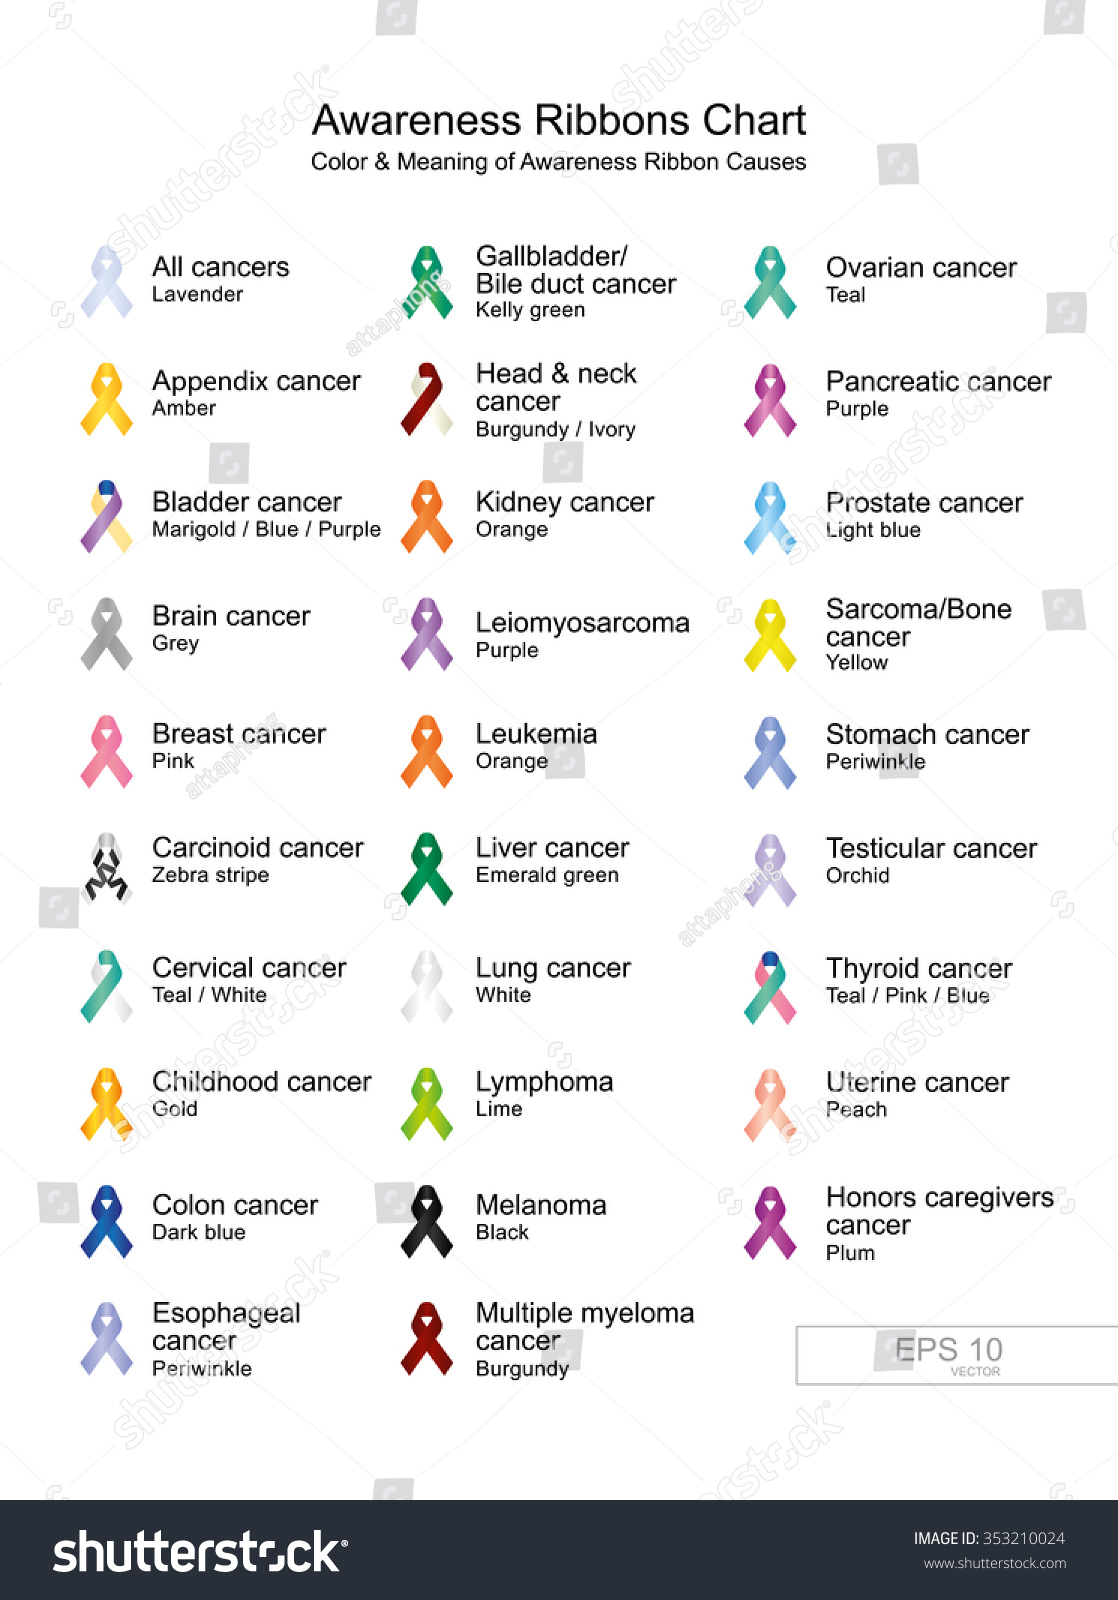 Cancer Colors Chart Printable